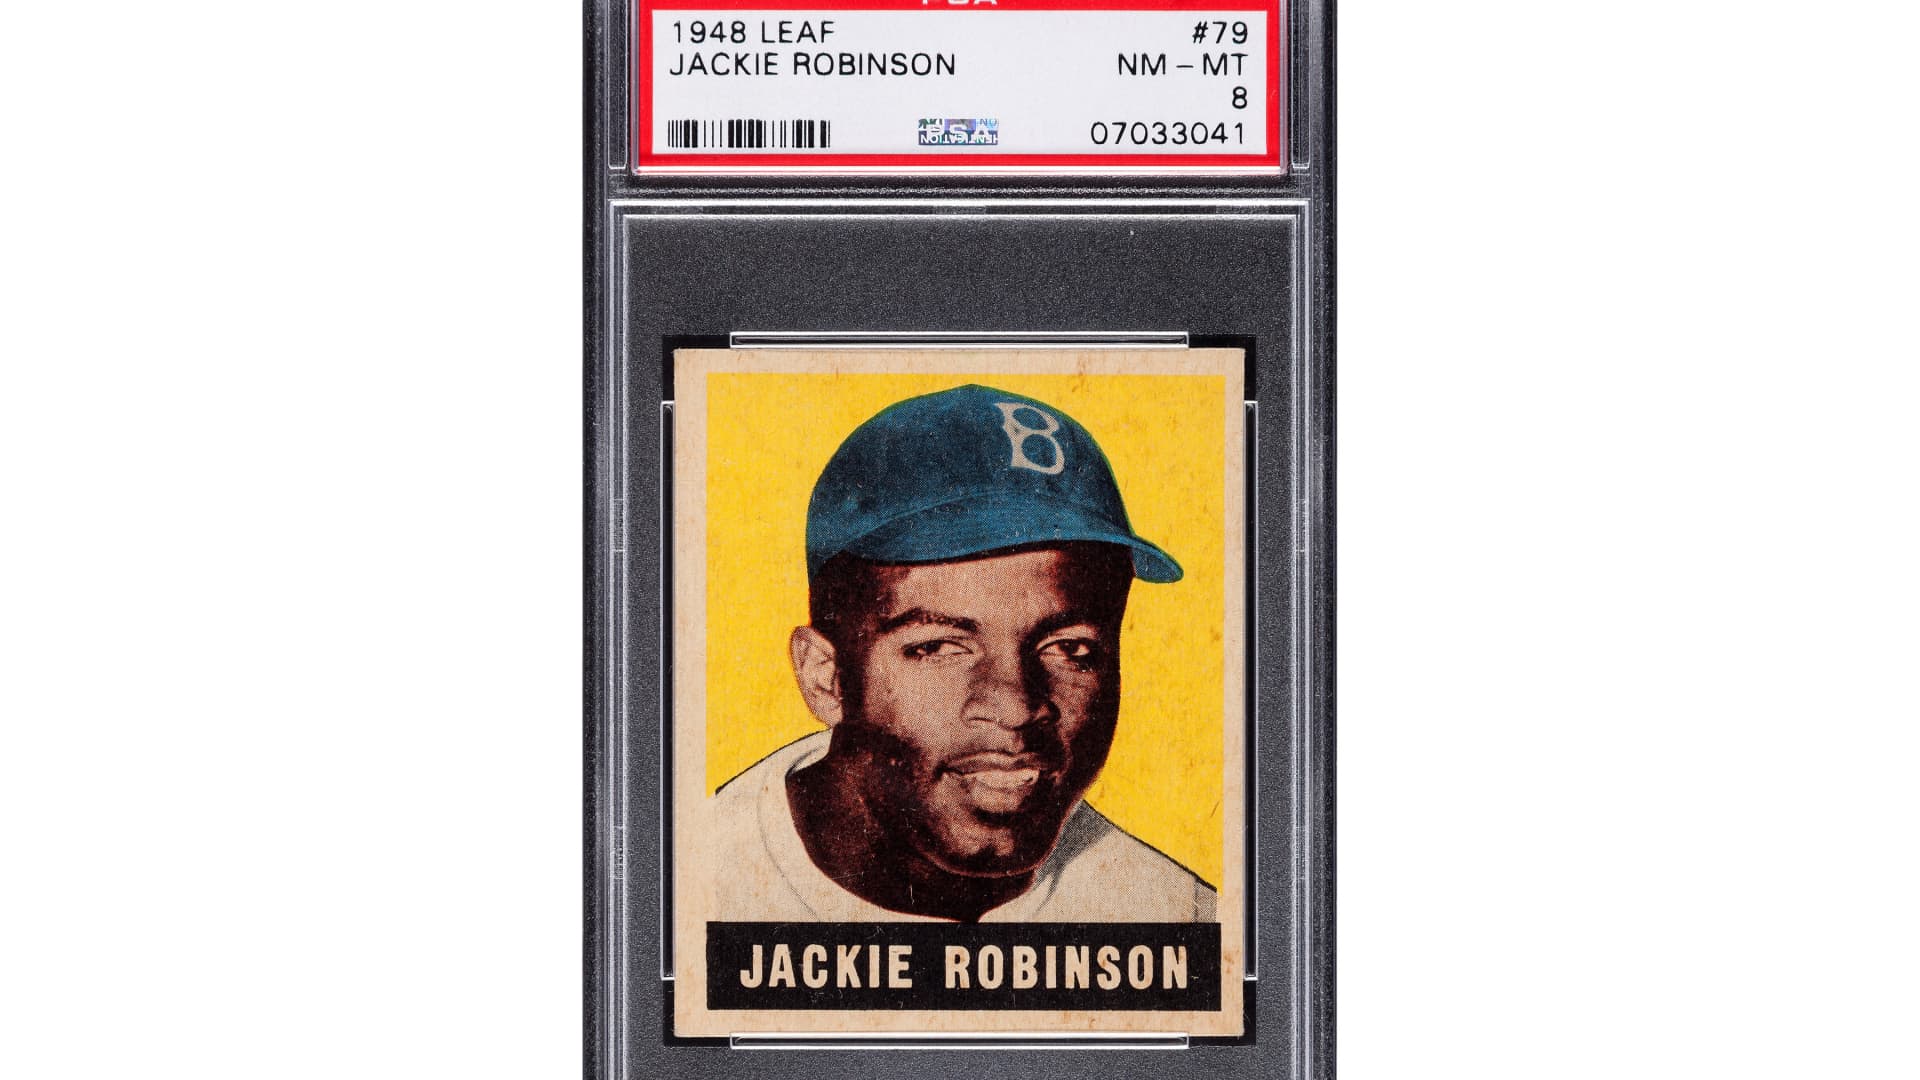 Sotheby’s, Fanatics team up to offer rare sports trading card auctions